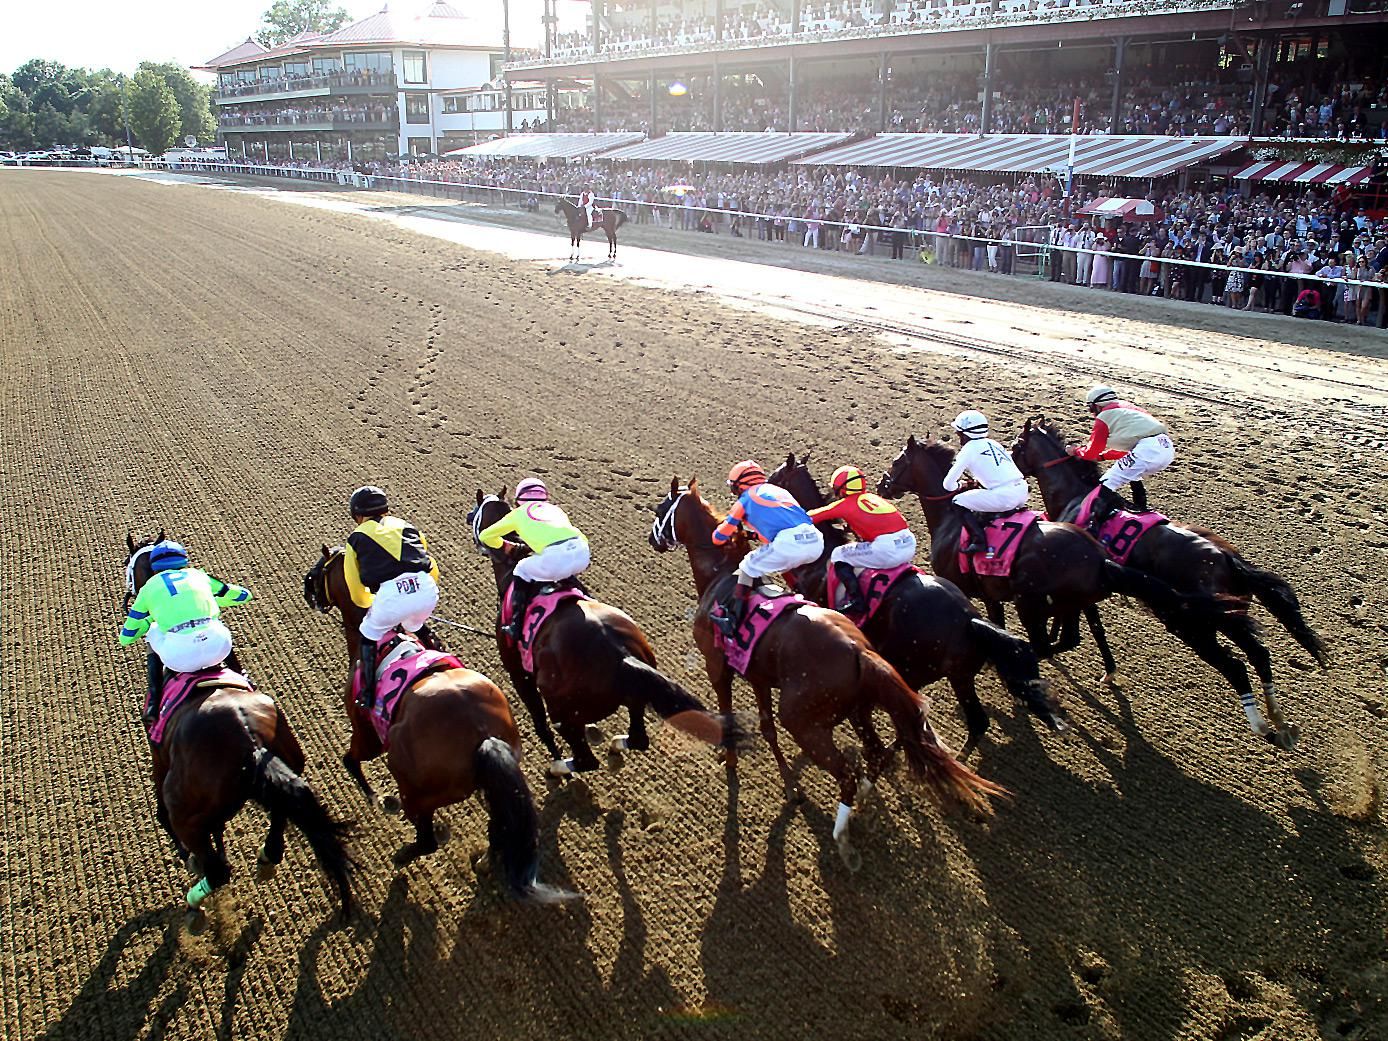 Nine neck-and-neck horses gallop over a dirt surface in front of crowded stands